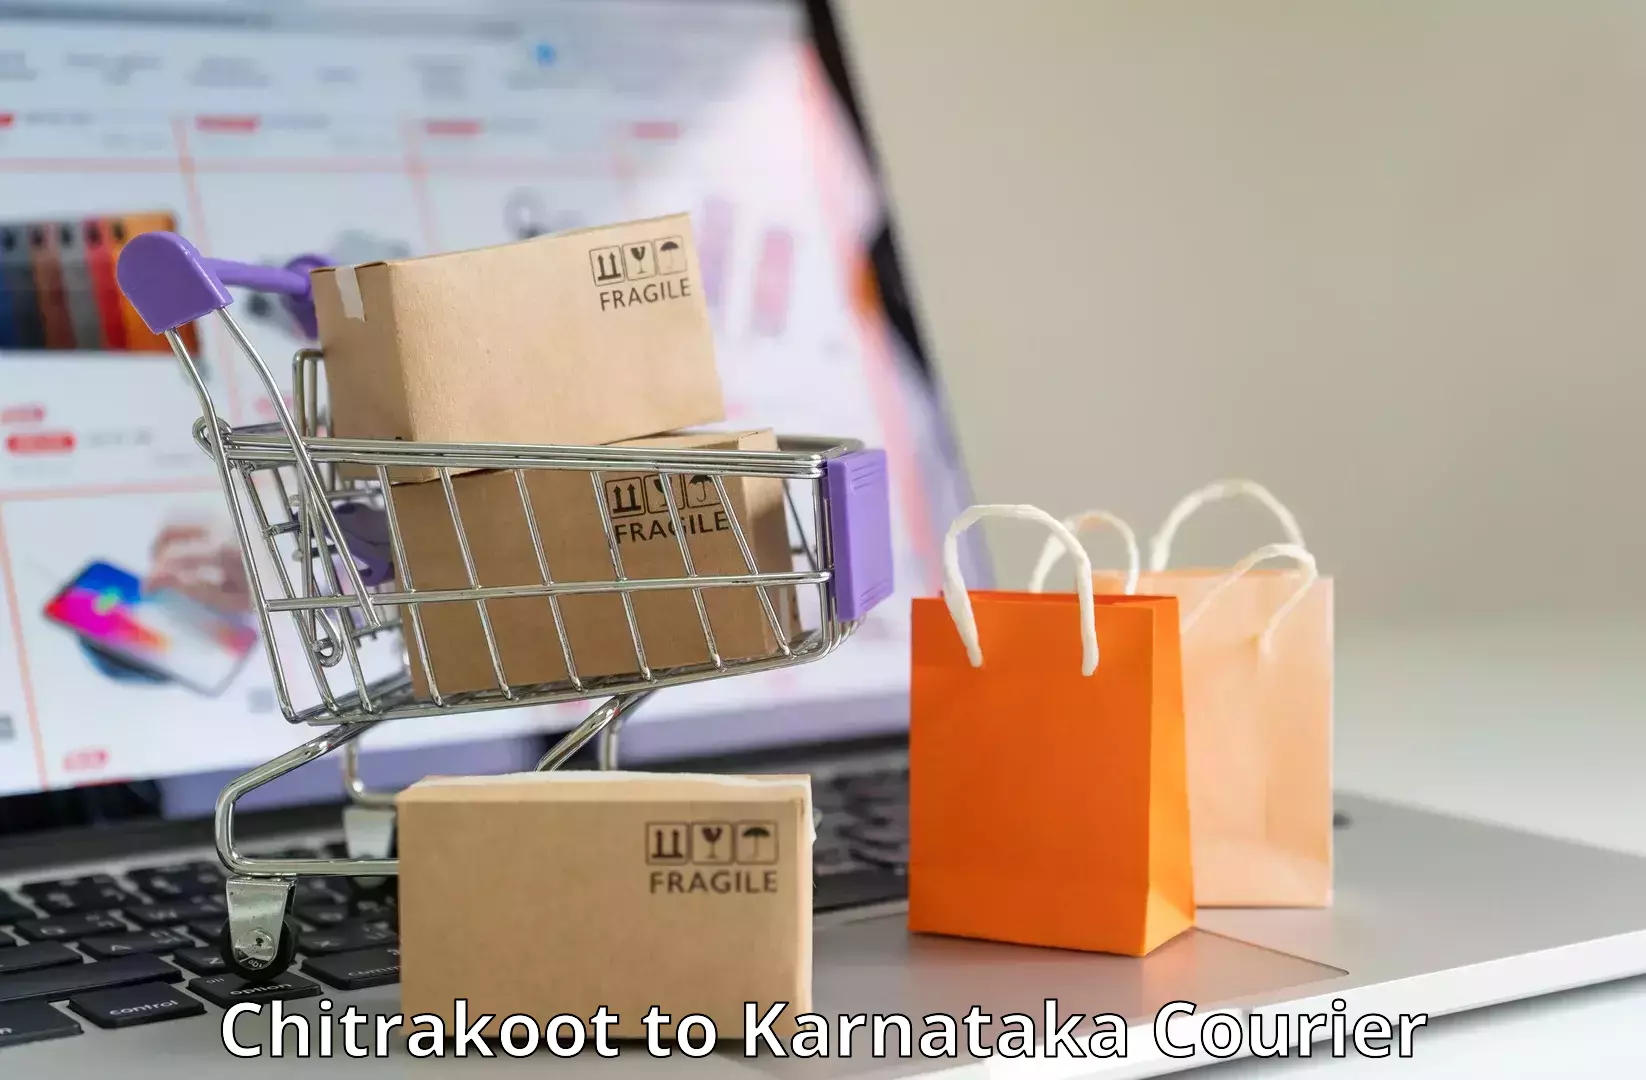 State-of-the-art courier technology in Chitrakoot to Mysore